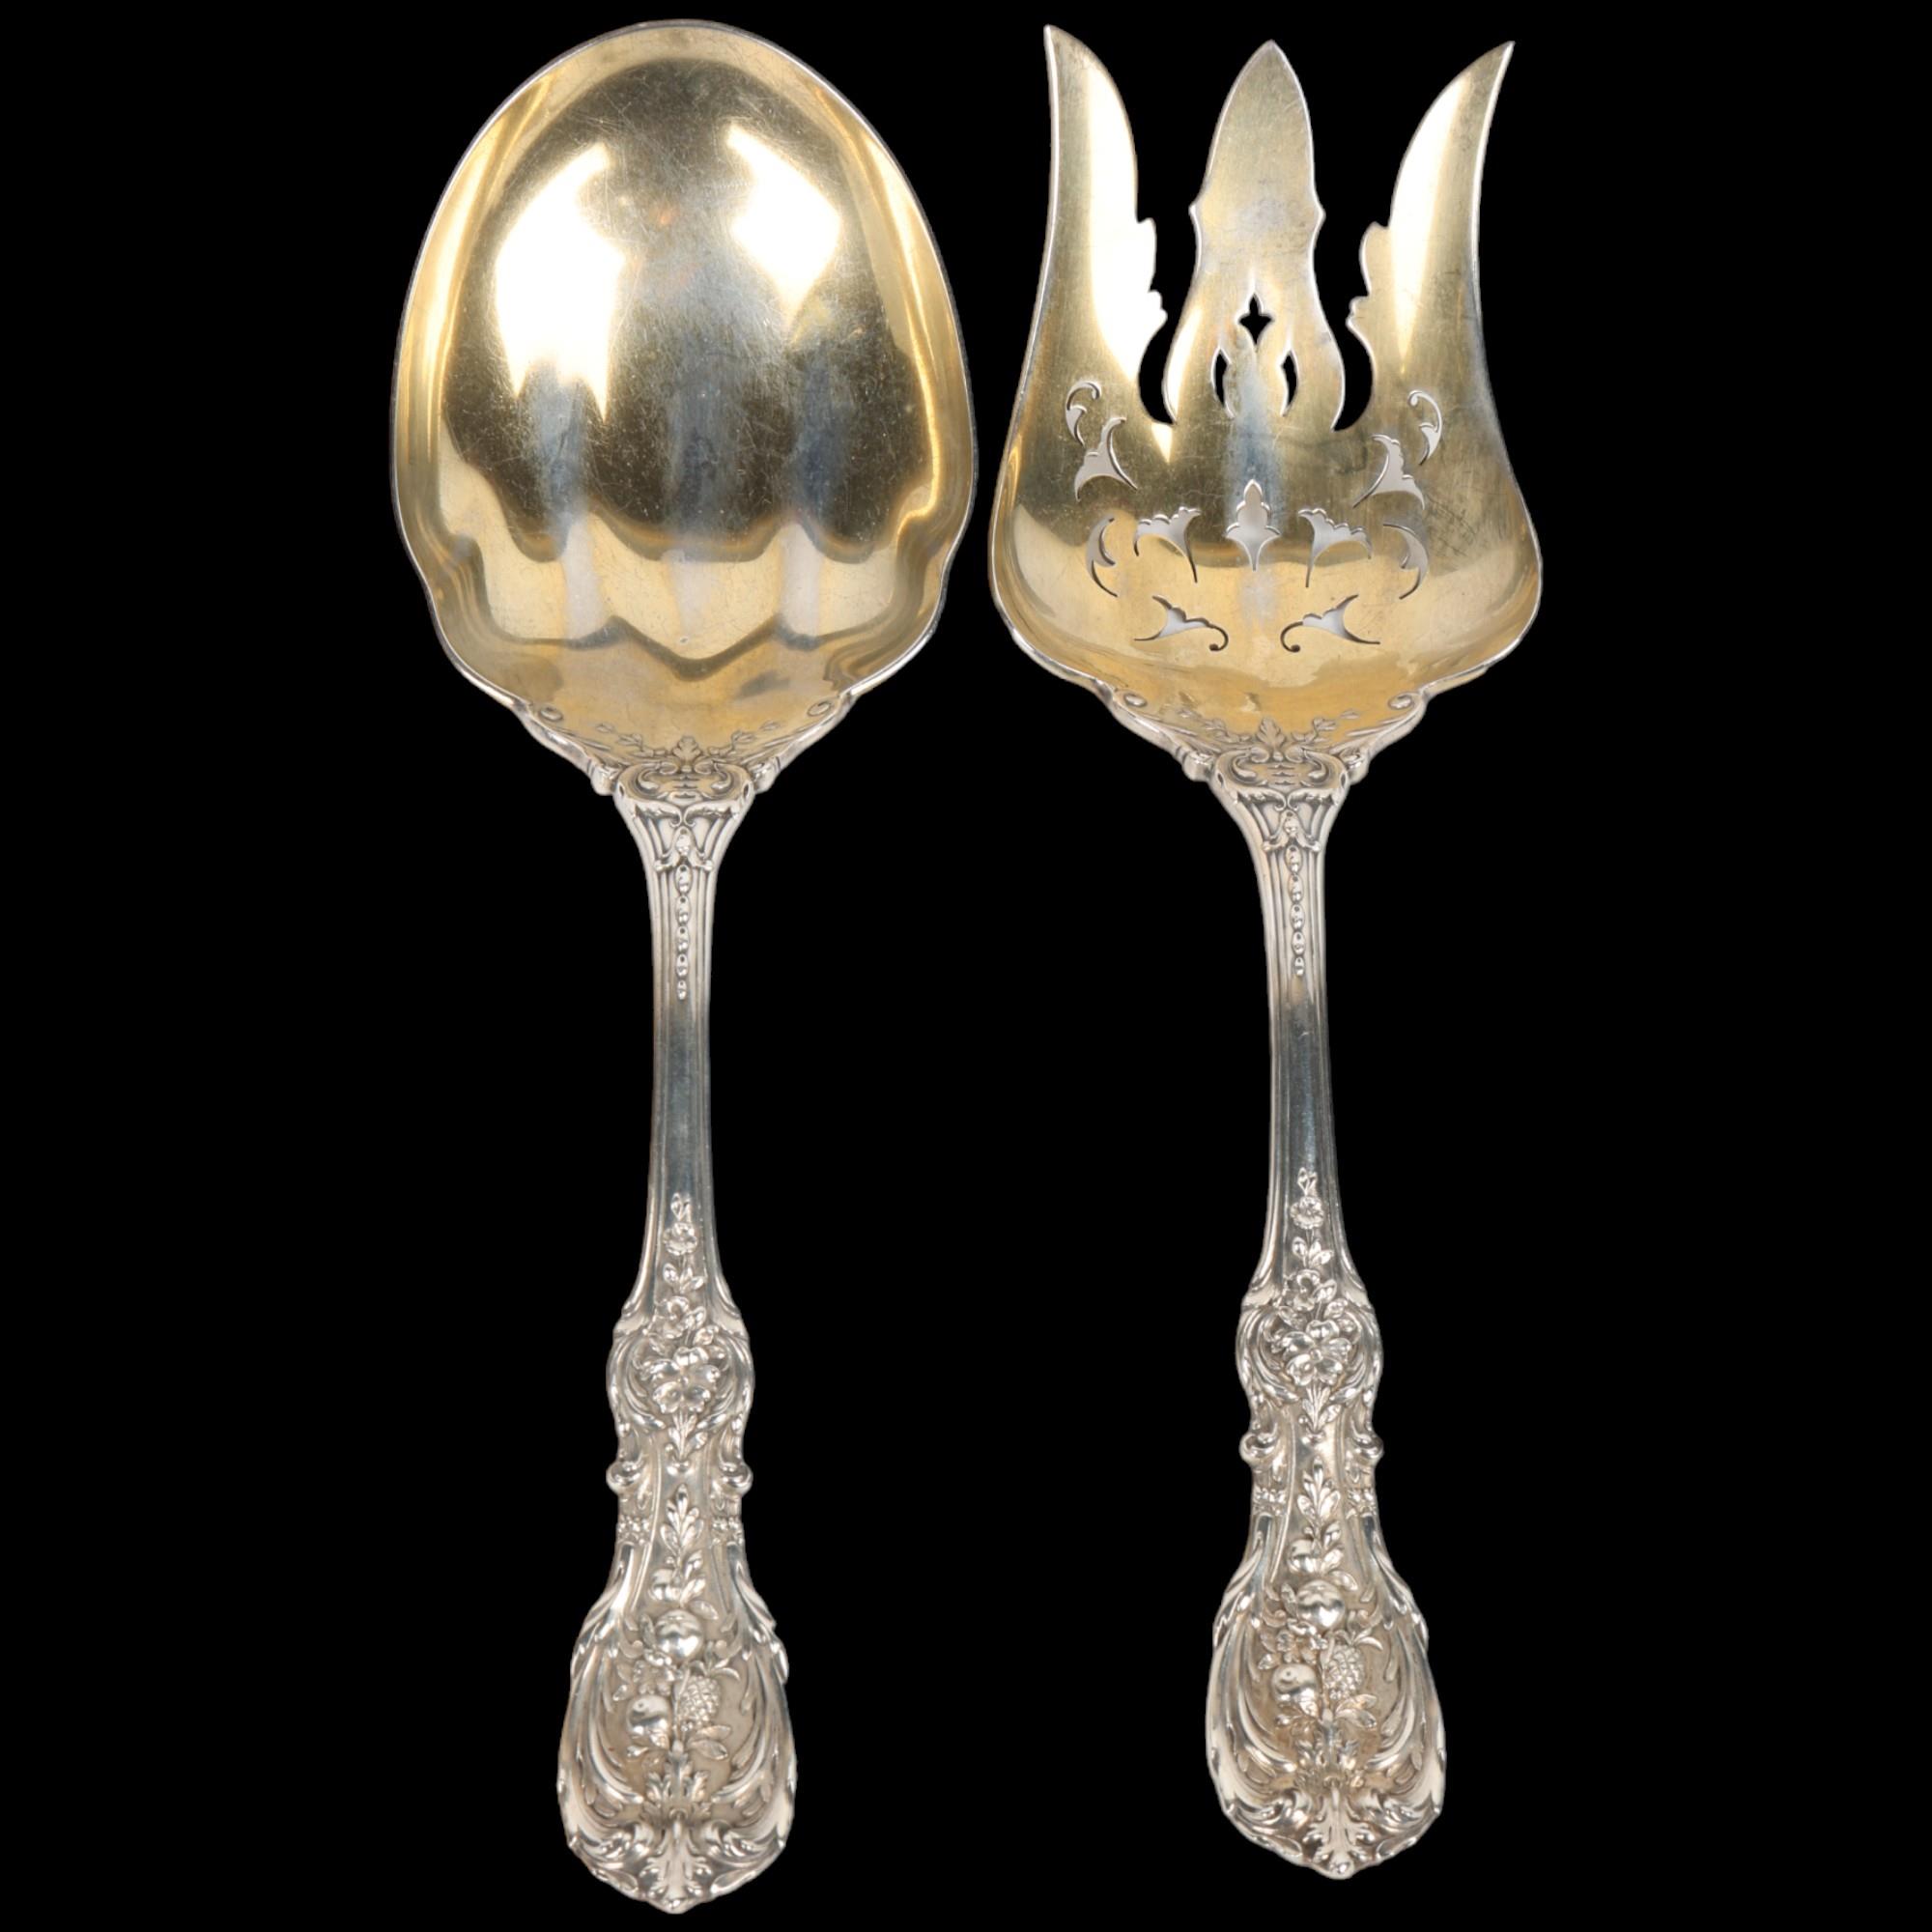 A pair of American sterling silver dessert servers, William Wise & Son, relief cast fruit and